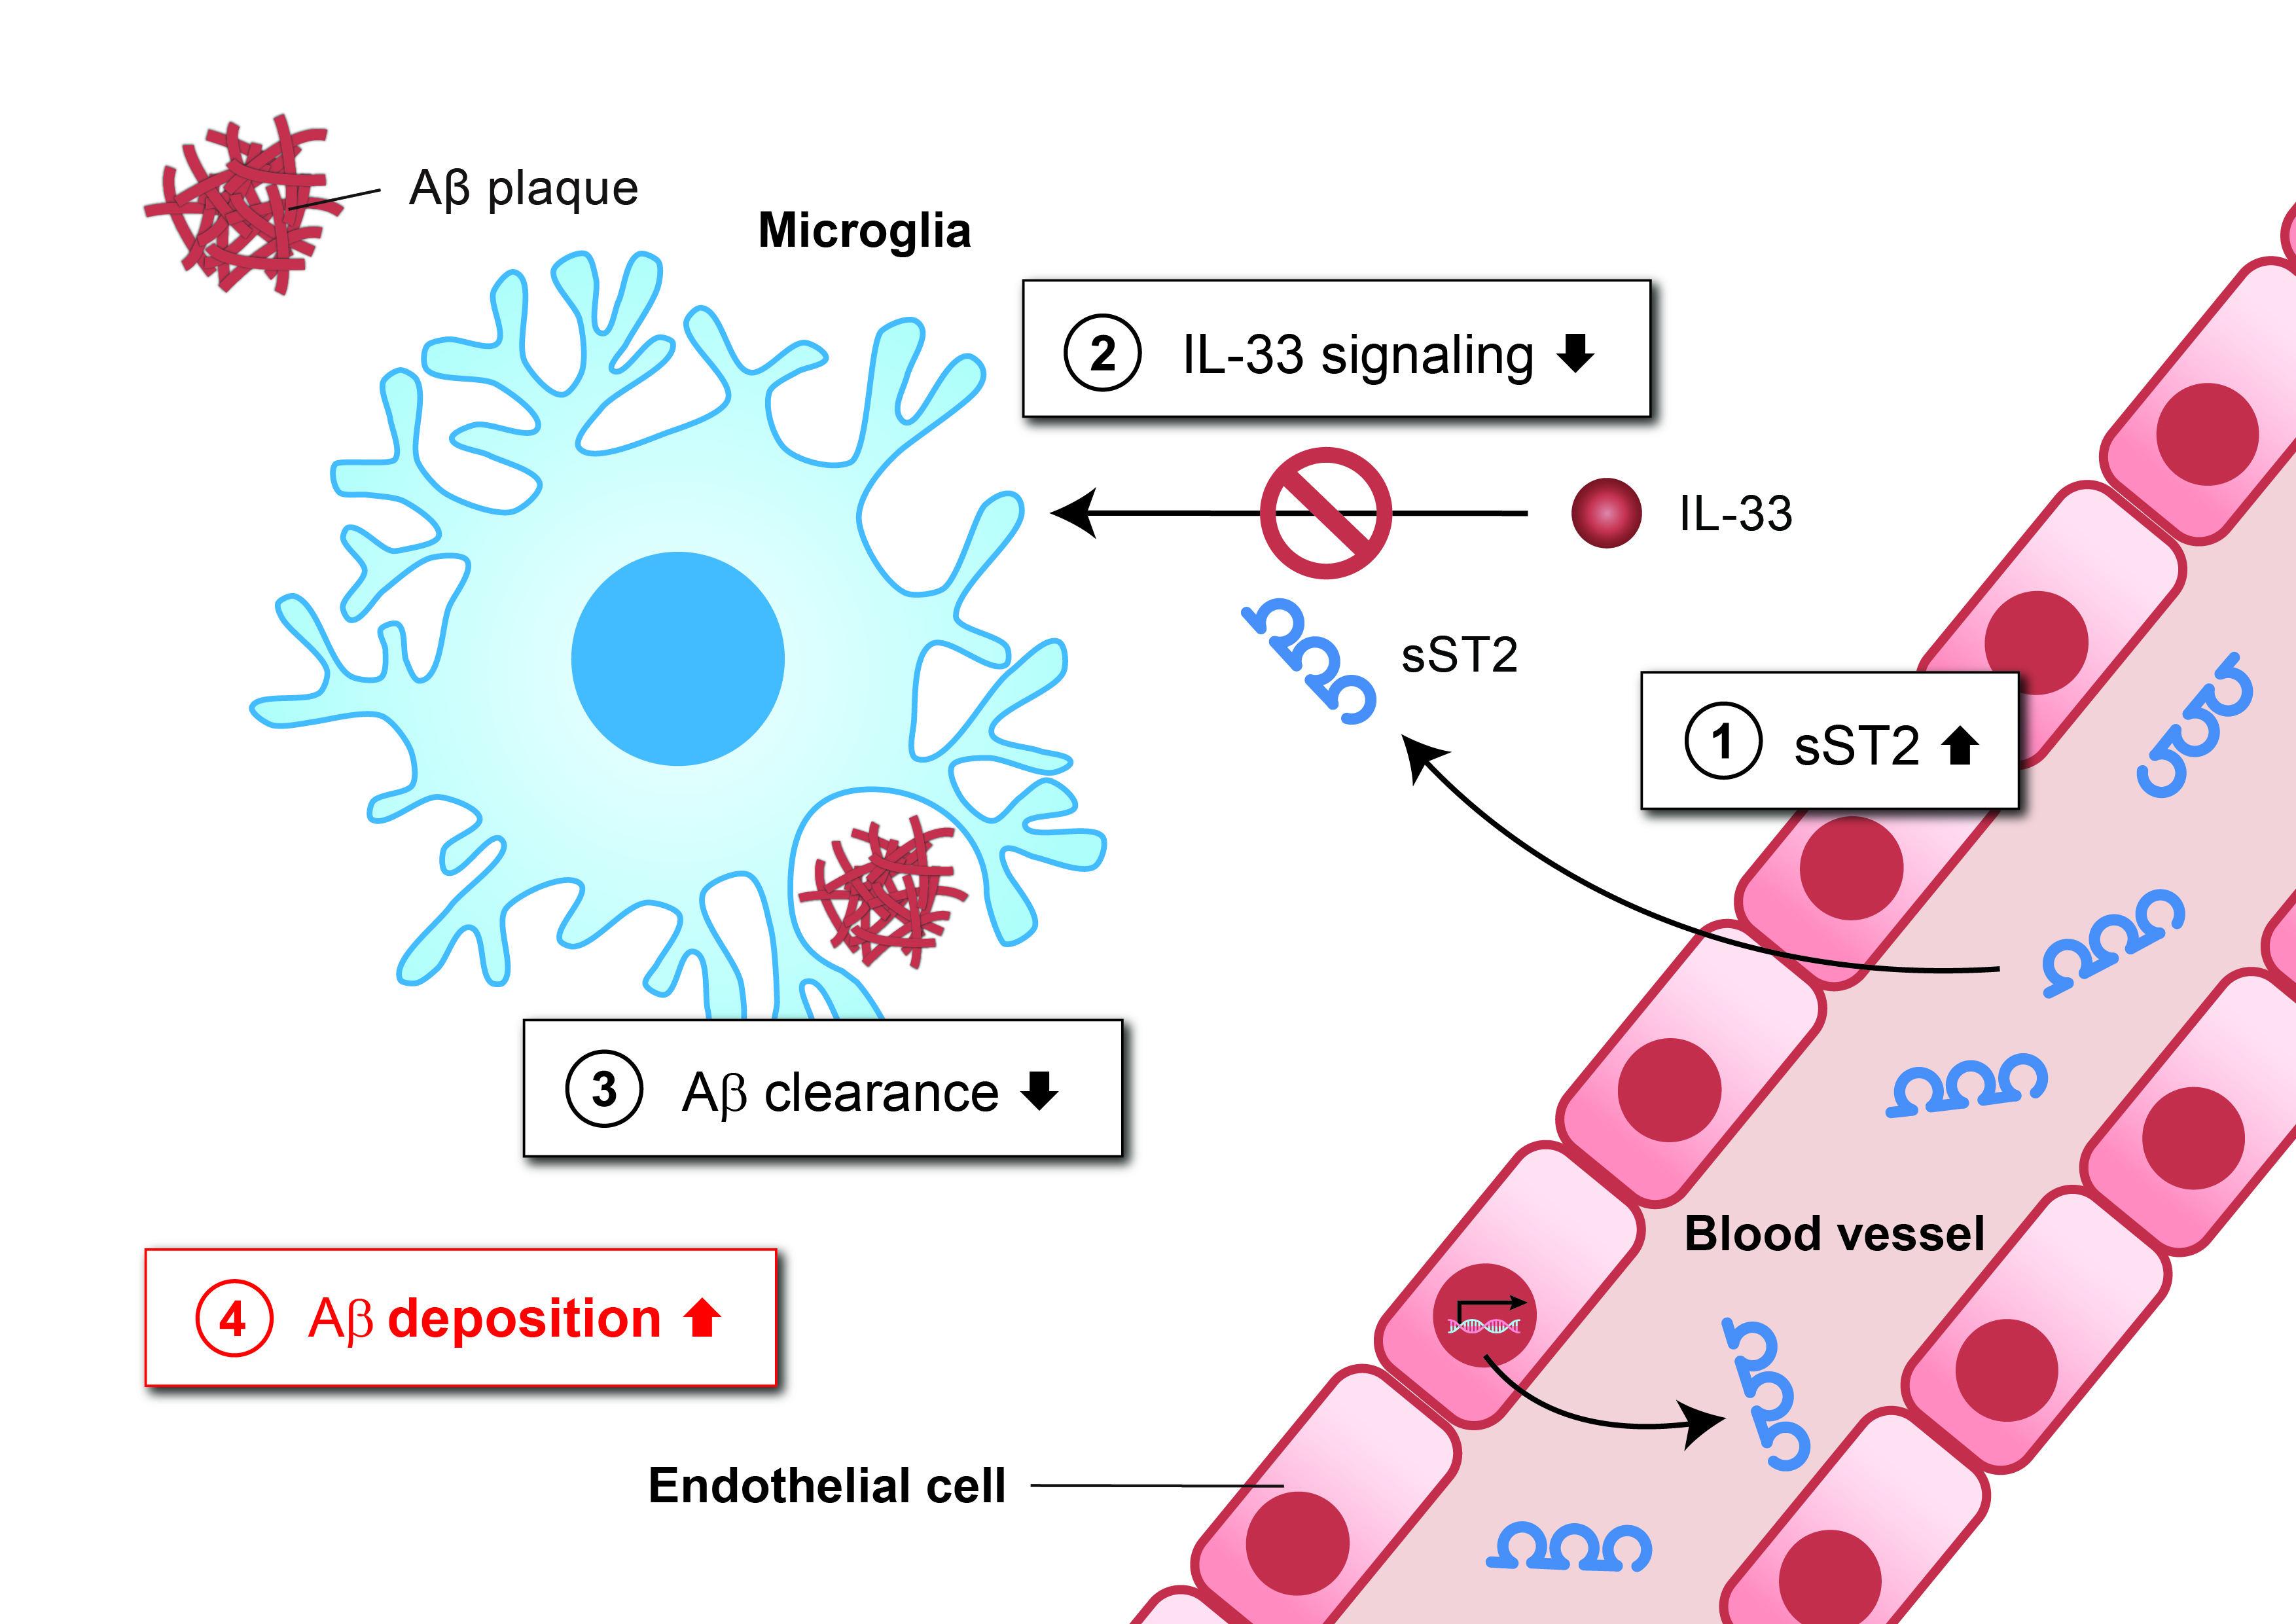 The diagram shows how increased sST2 levels in AD impair microglial clearance of amyloid pathology: increased levels of sST2 protein (1) in the blood enter the brain; this decoy receptor blocks the normal signaling stimulated by IL-33 in microglia (2). The inhibition of IL-33 signaling leads to reduced clearance of Aβ by microglia (3), resulting in an increase in Aβ plaque load (4).